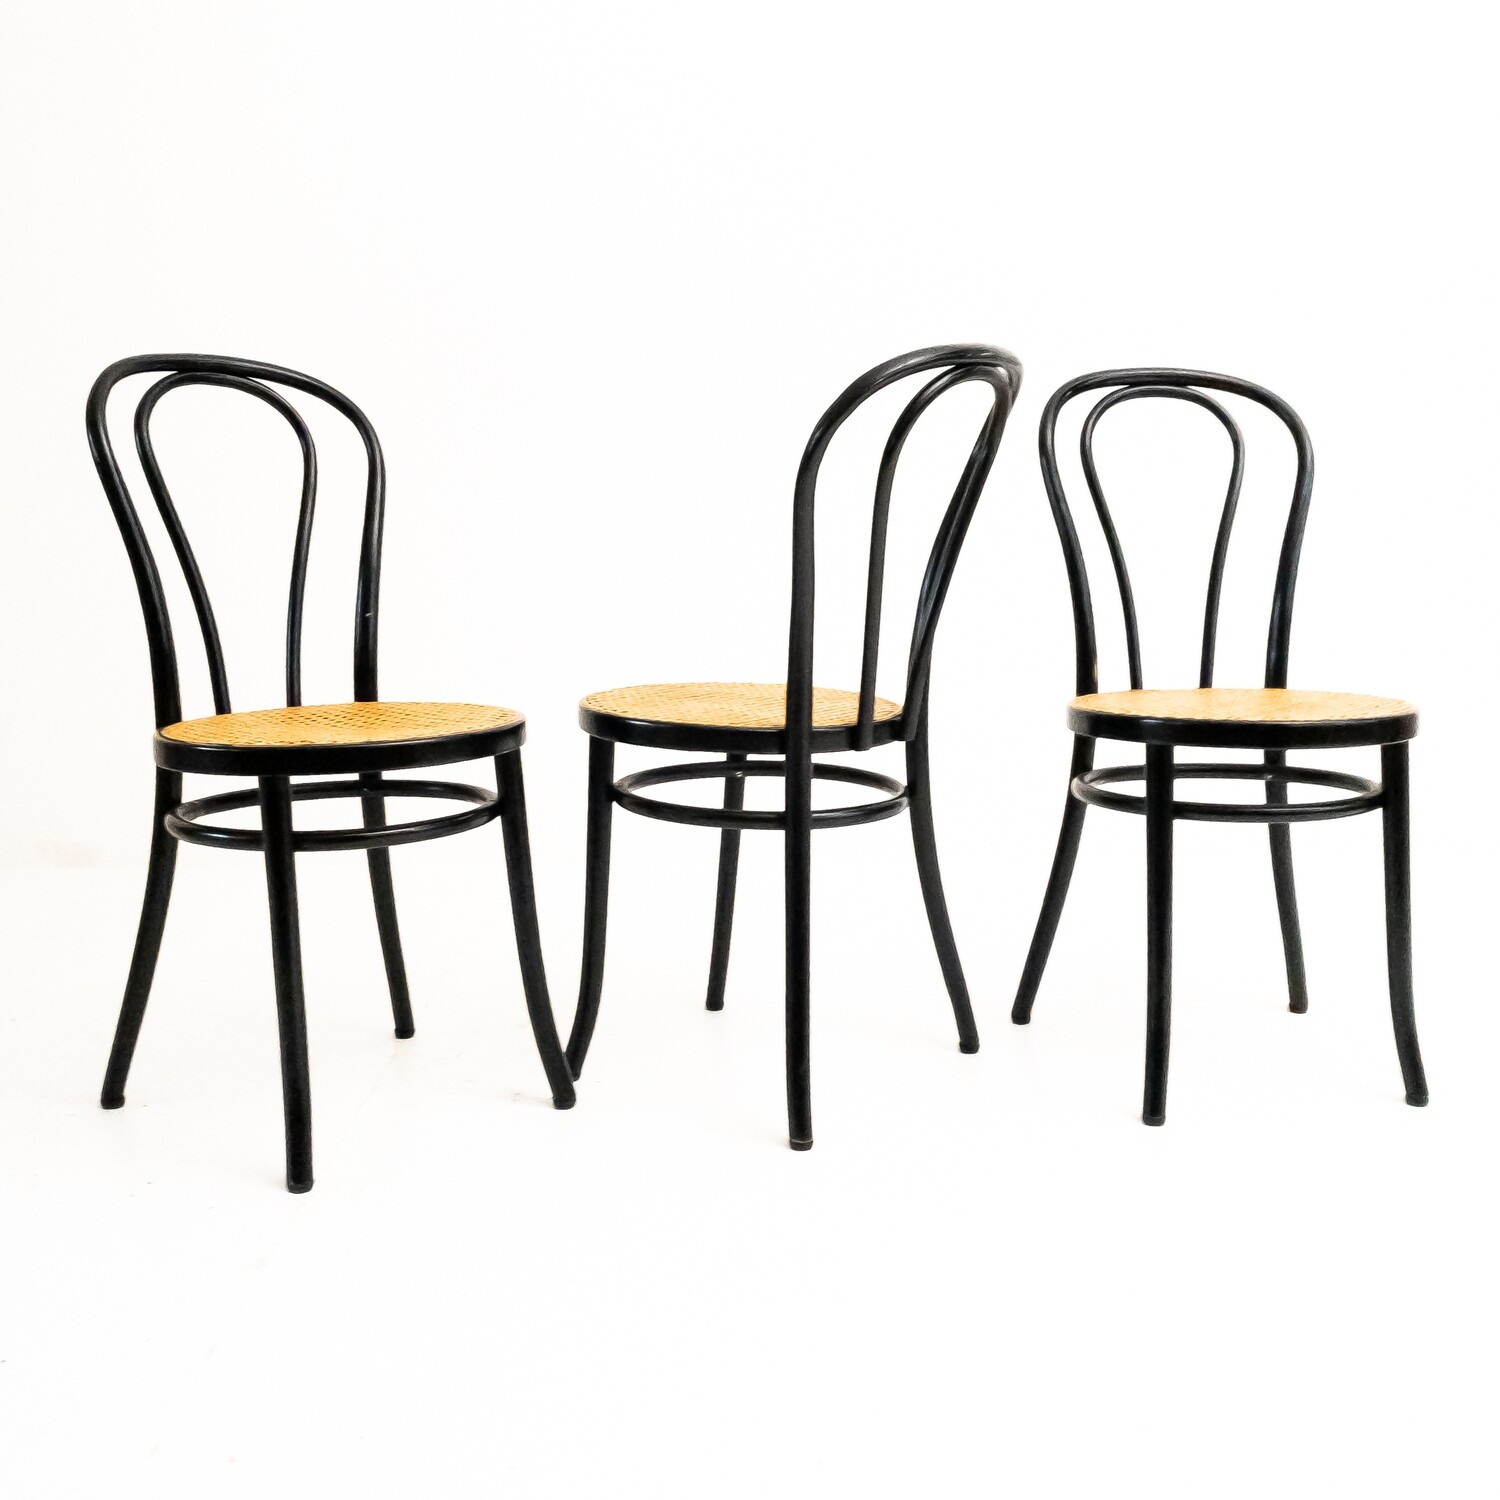 Set of 3 Thonet style chairs, 1980s